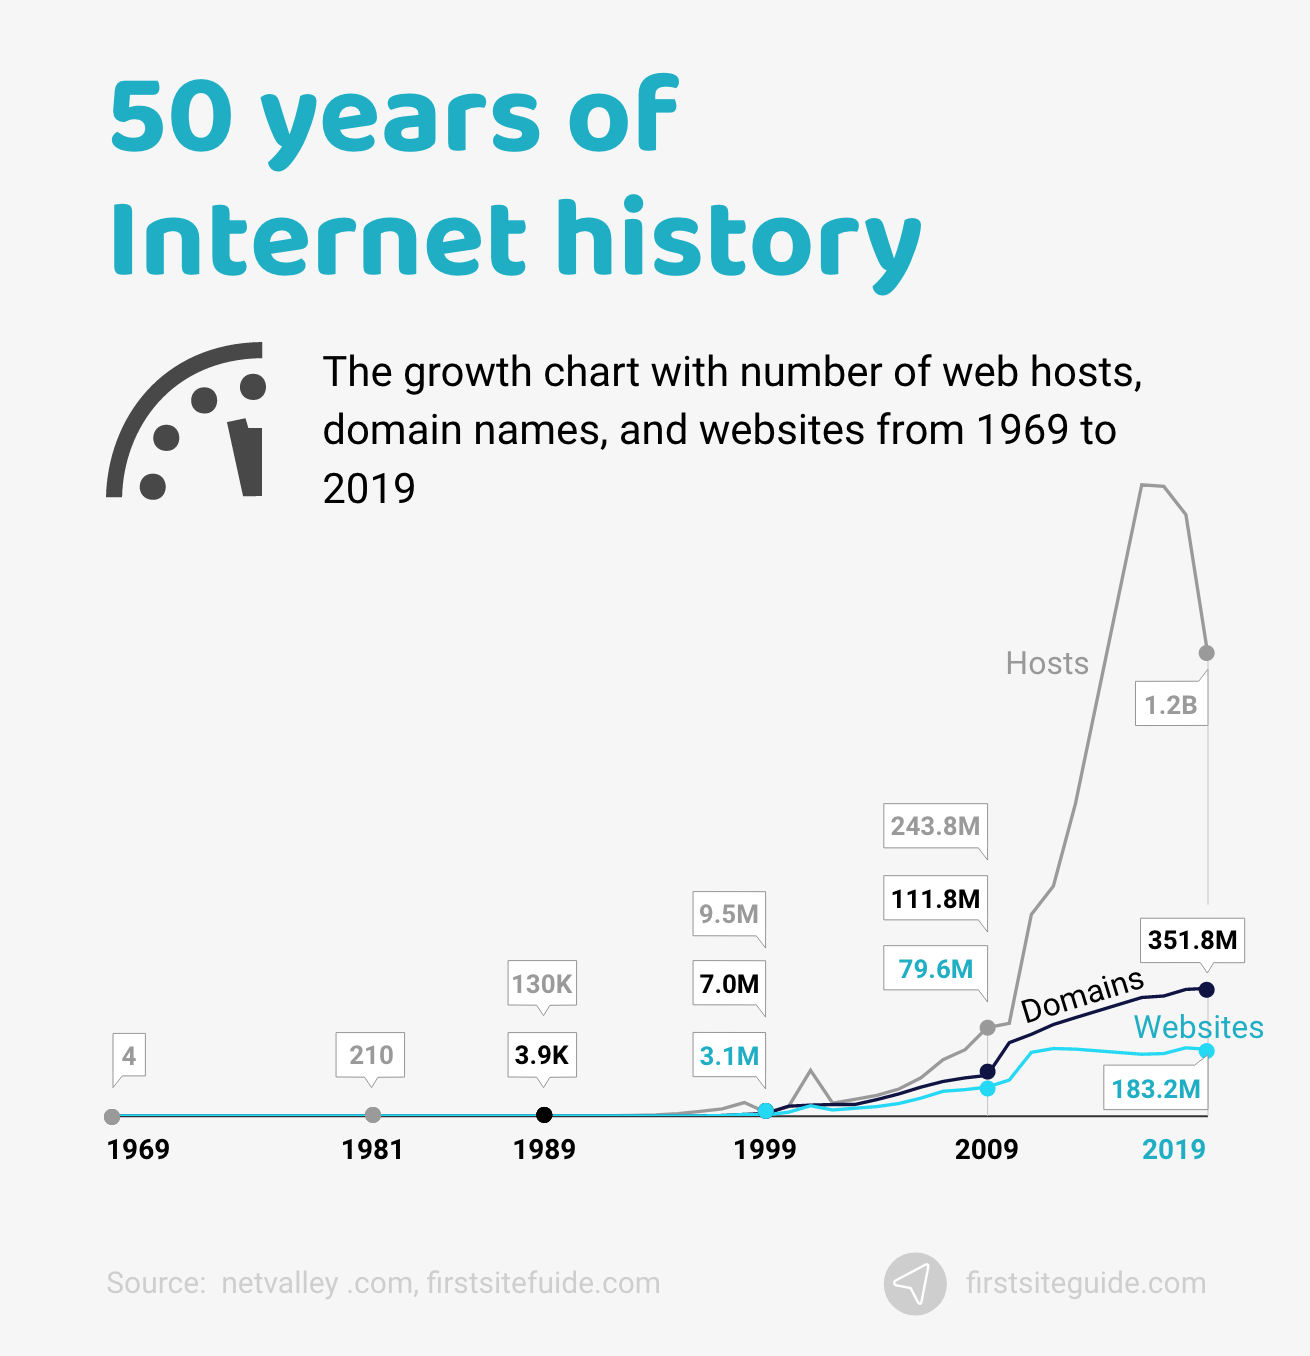 50 years of Internet history